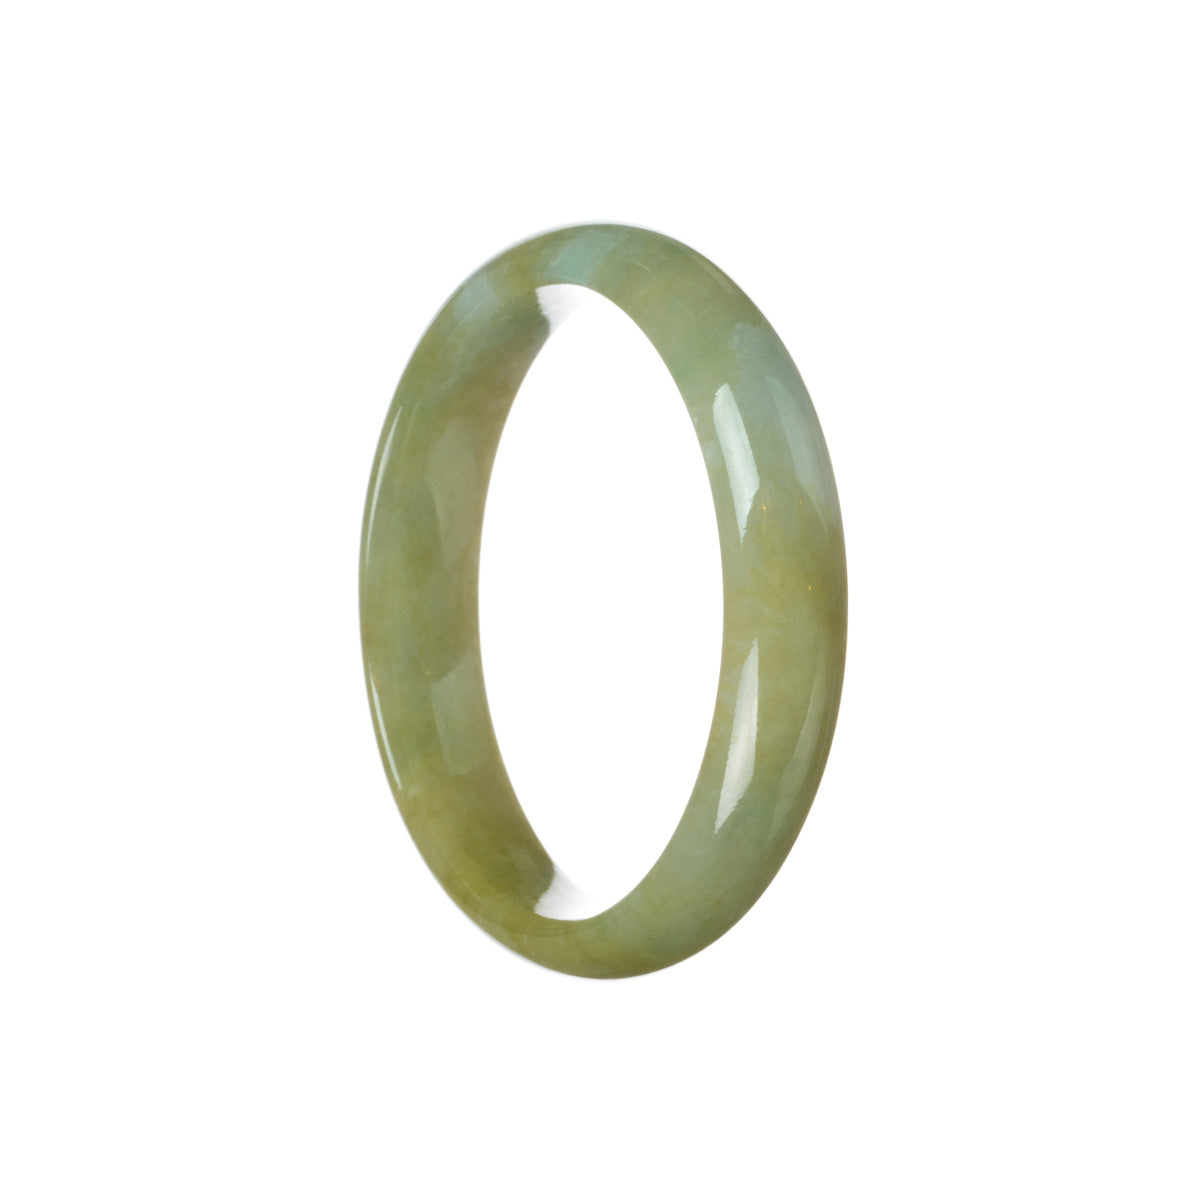 A beautiful Burmese Jade bangle bracelet featuring a genuine Grade A brownish olive green color with a white patch, in the shape of a 59mm half moon.